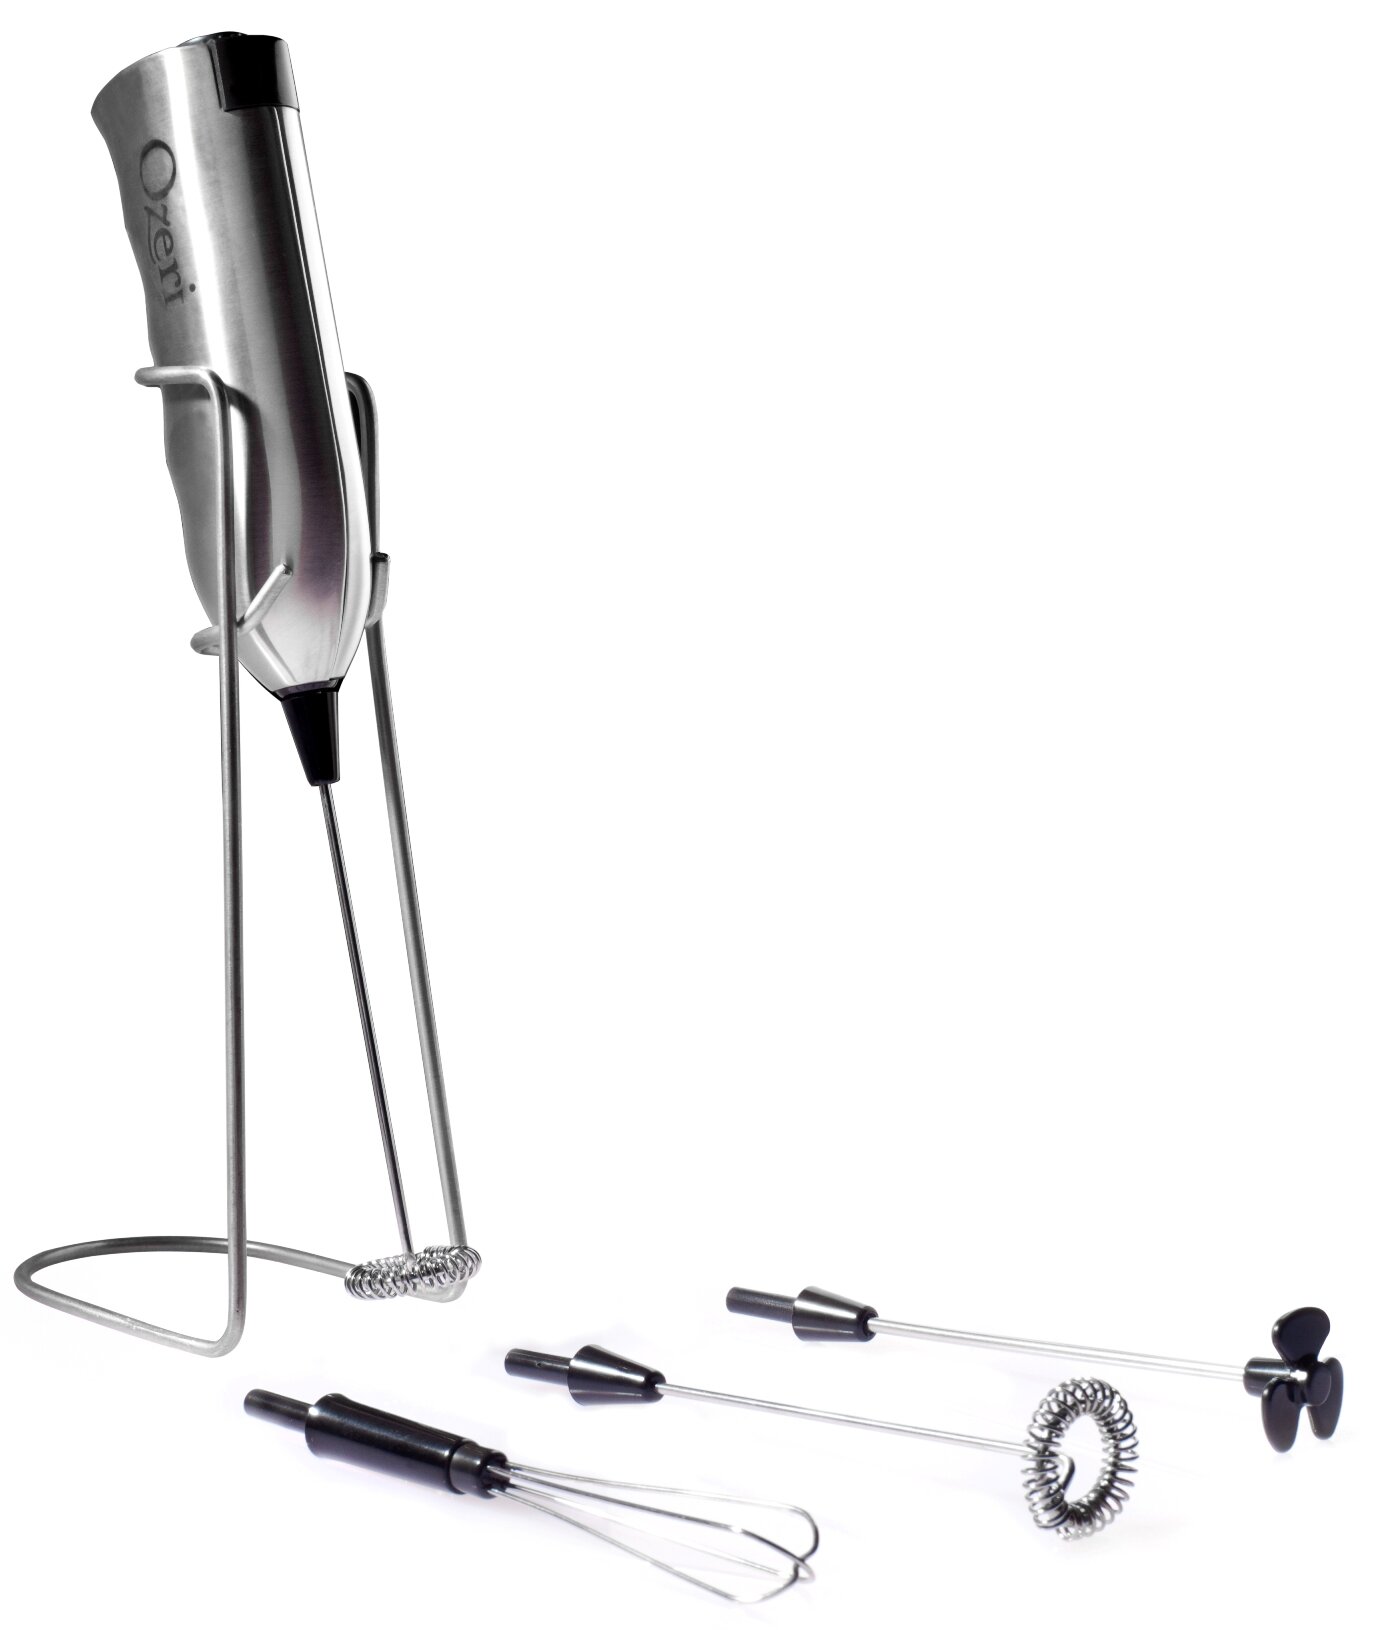 Ozeri Deluxe Milk Frother & Whisk in Stainless Steel, with Stand